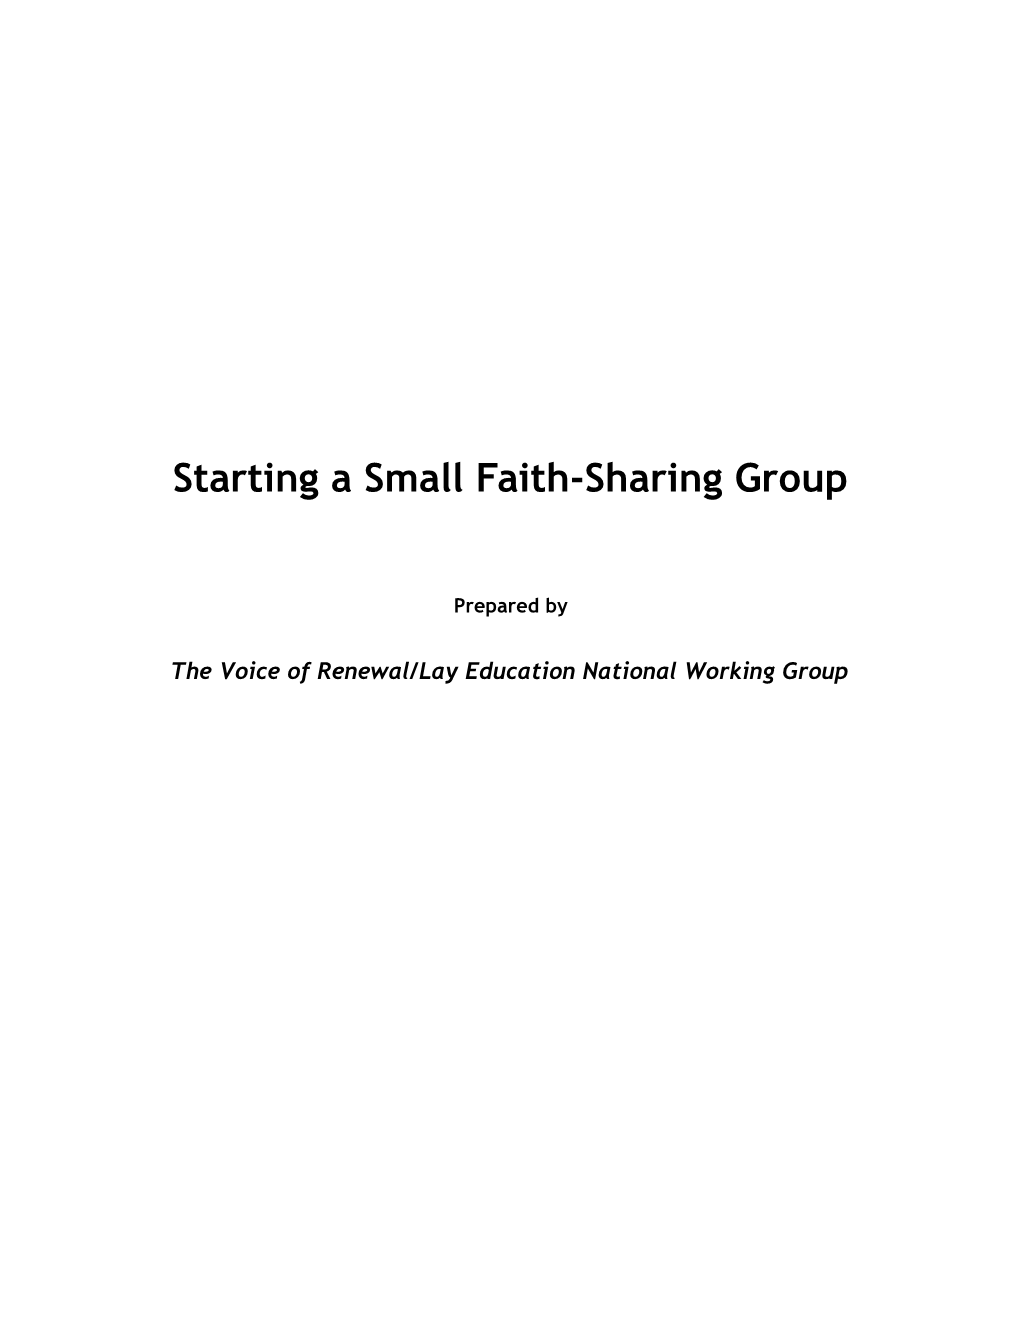 Starting a Small Faith-Sharing Group